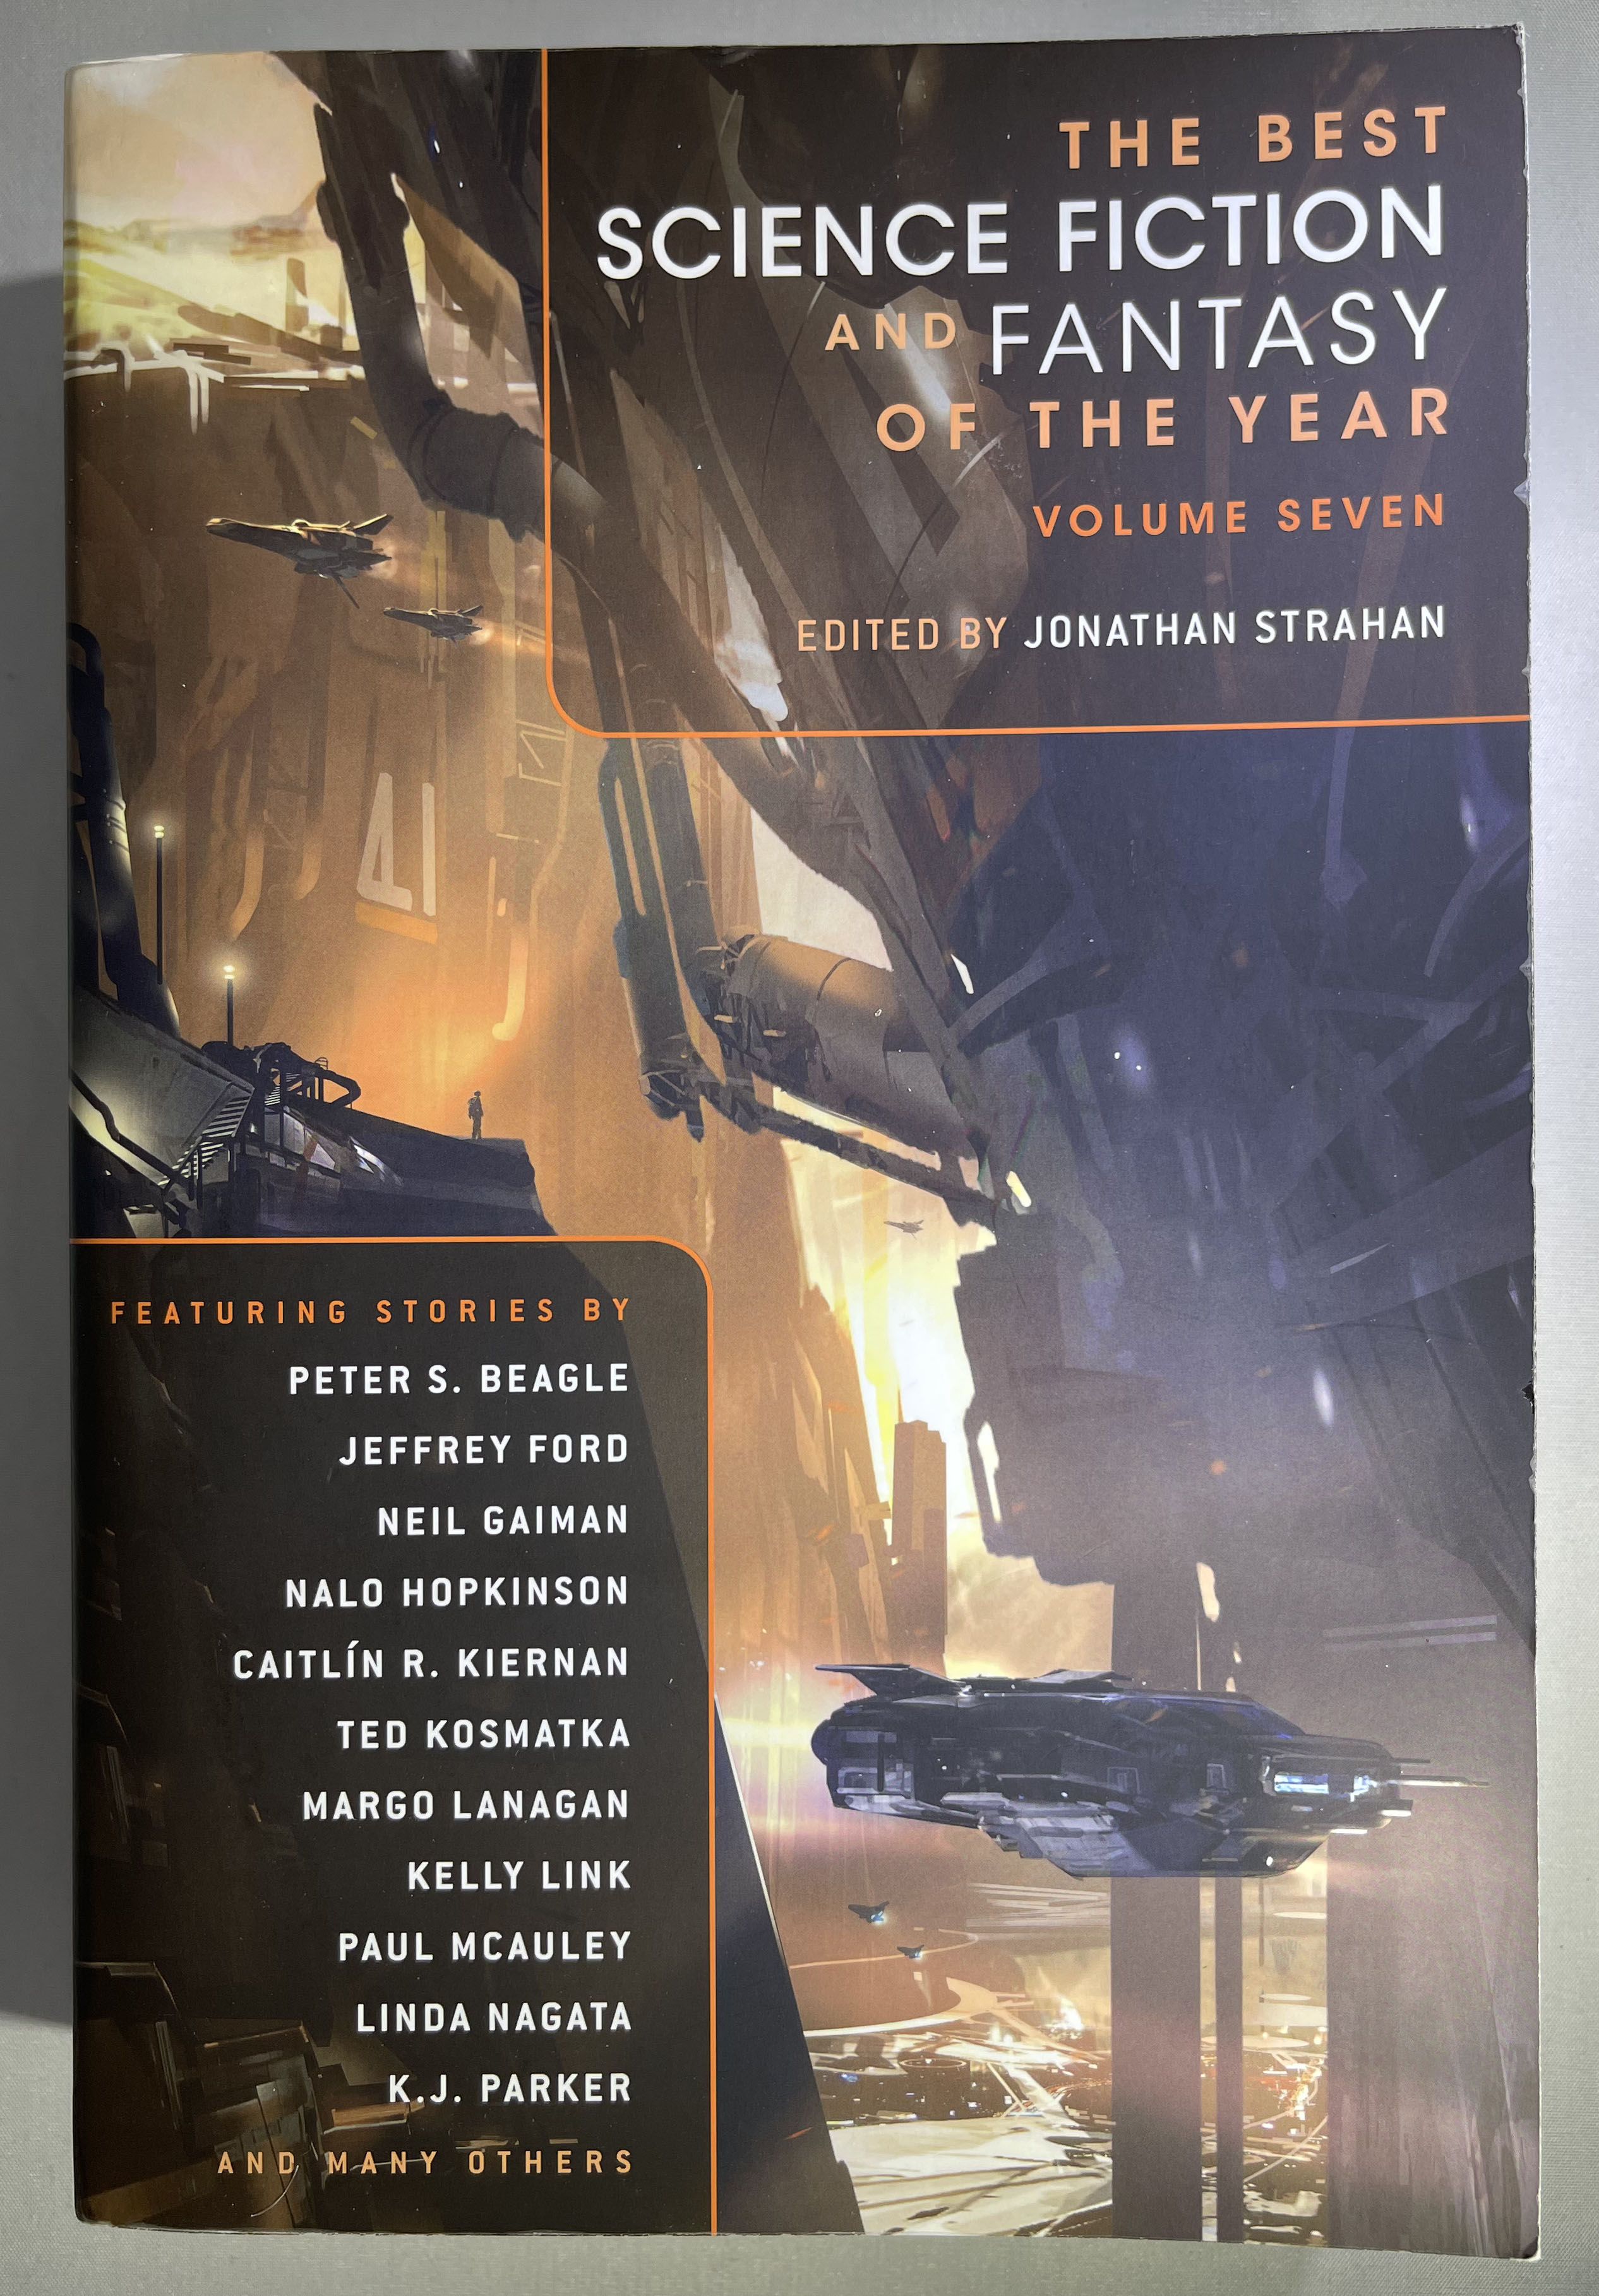 The Best Science Fiction and Fantasy of the Year, Volume Seven (7) [SIGNED] - Jonathan Strahan (editor)